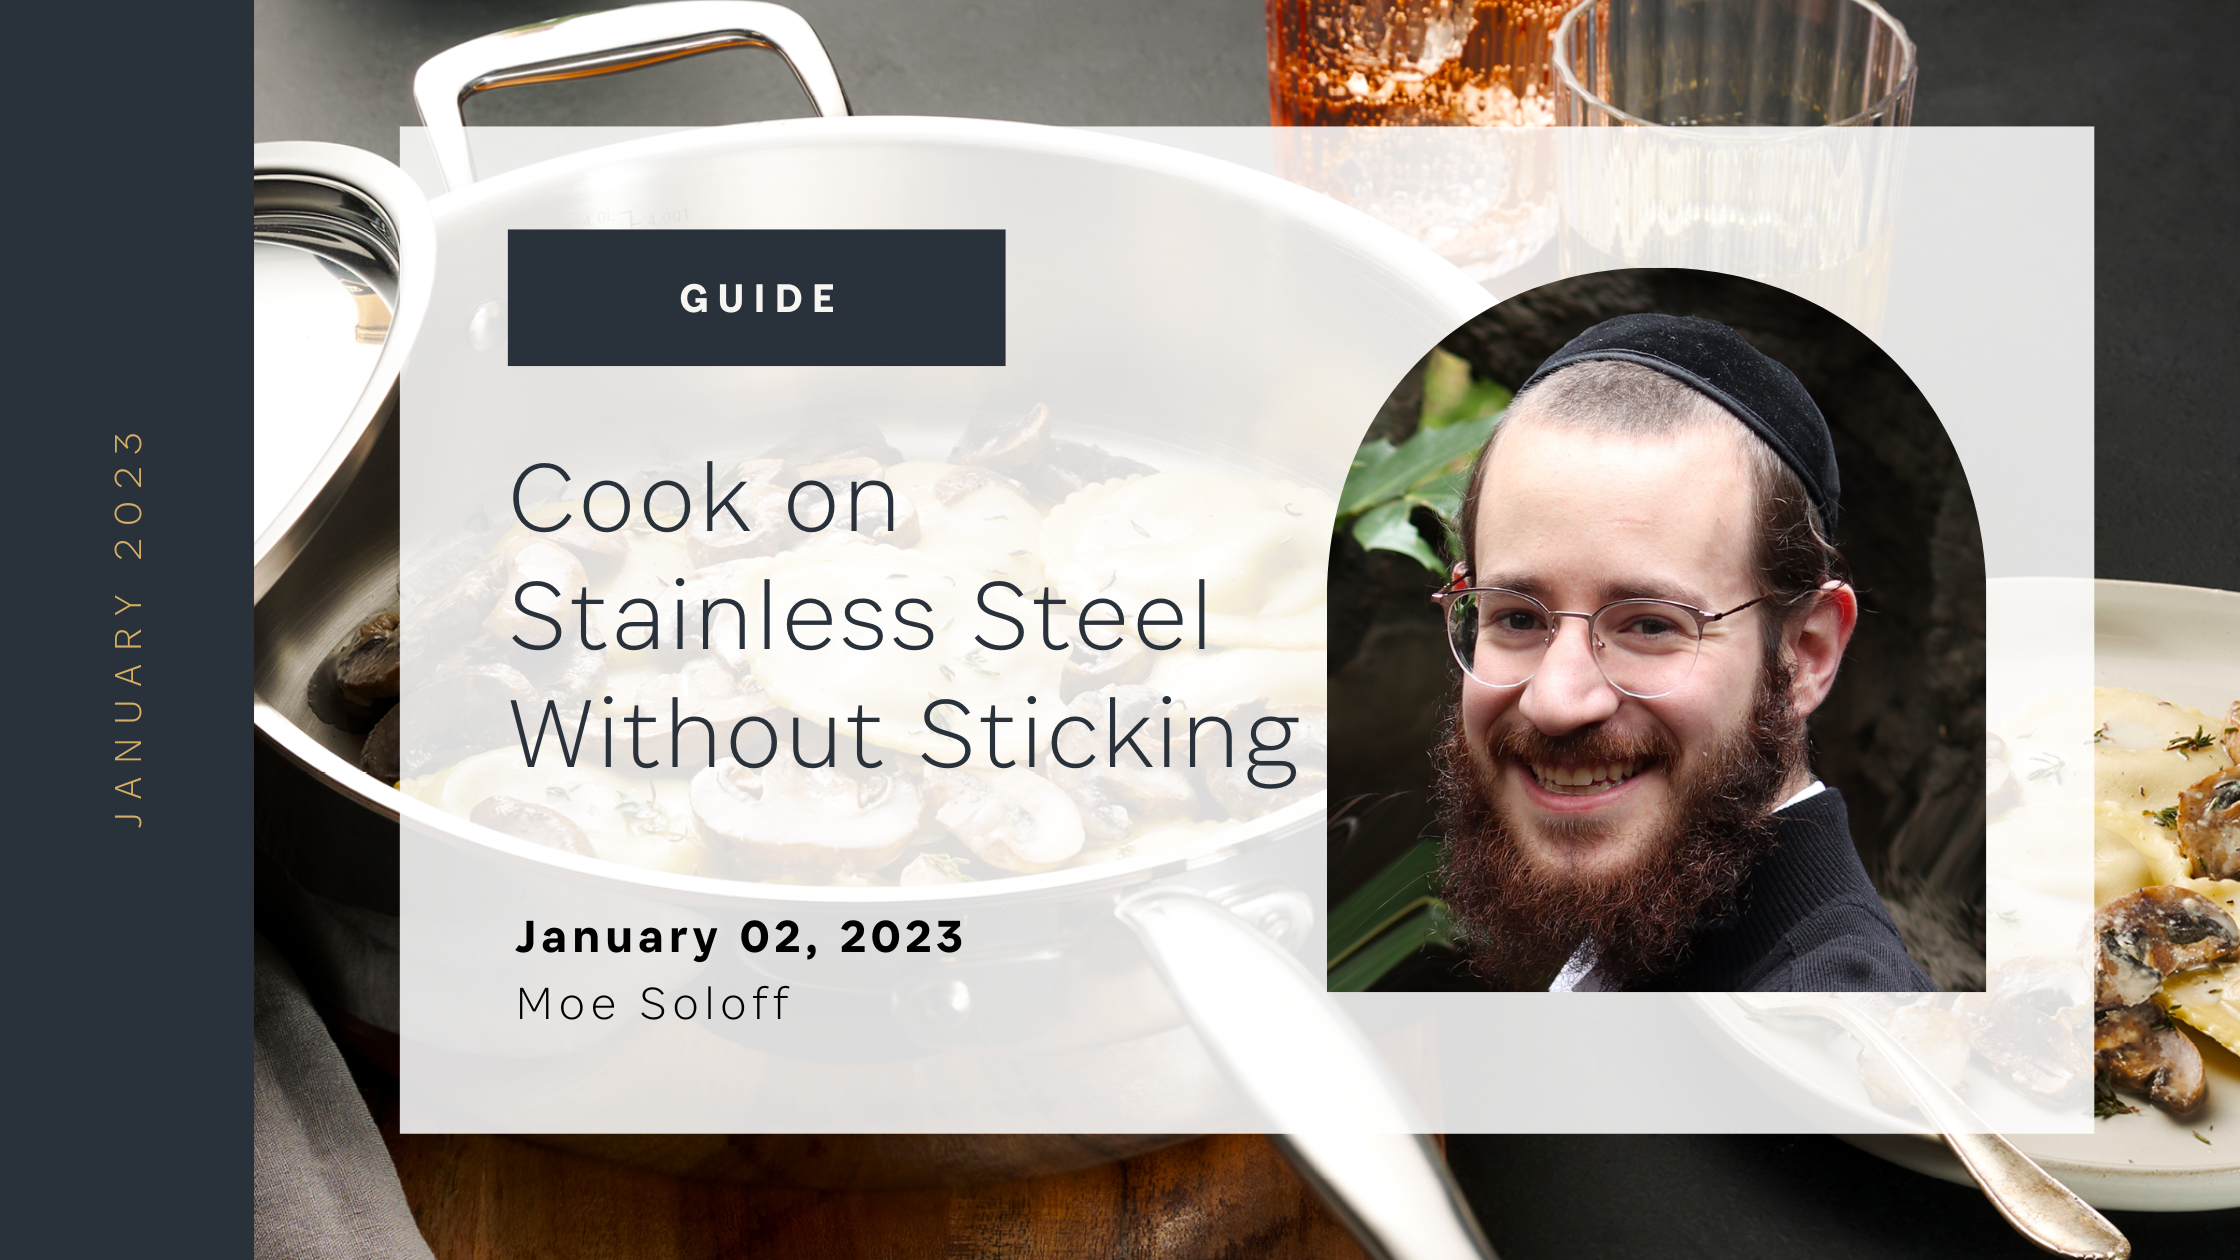 Guide to Cook with Stainless Steel cookware